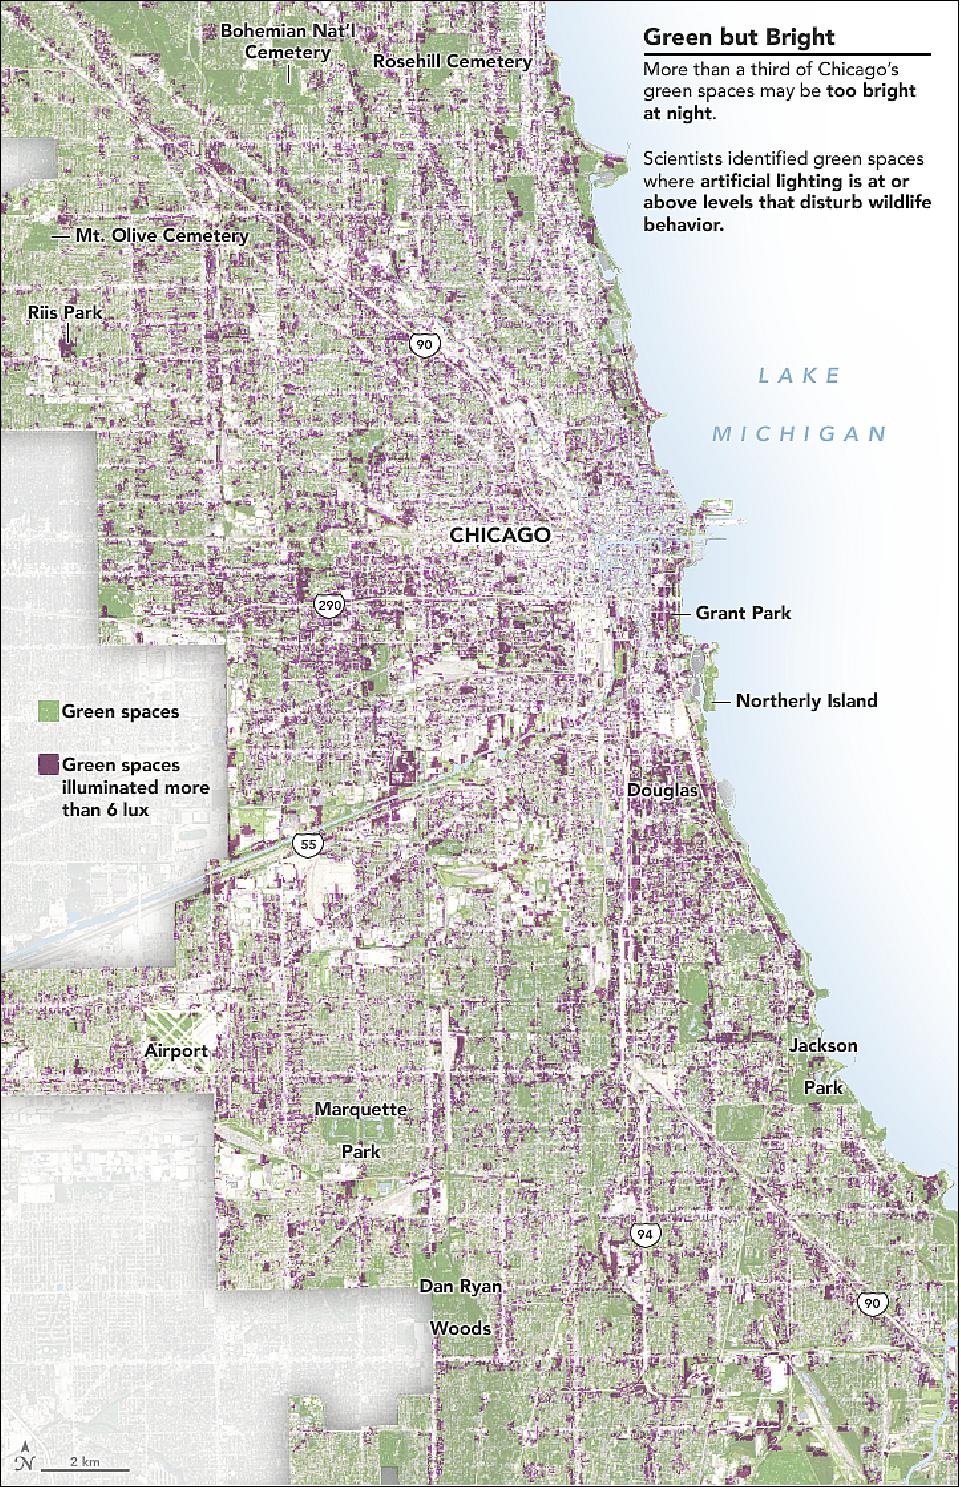 Figure 29: January 19, 2008 - October 9, 2013. Using this information, the team mapped where electric light pollution in Chicago is likely to have the largest effect on wildlife. This image shows the green spaces in Chicago and whether they are above or below light levels of 6 lux. Land cover data come from the Chicago Metropolitan Agency of Planning. To determine the lux levels, the researchers used the photos from the ISS, measuring the value of each pixel to determine which areas were above and below 6 lux.